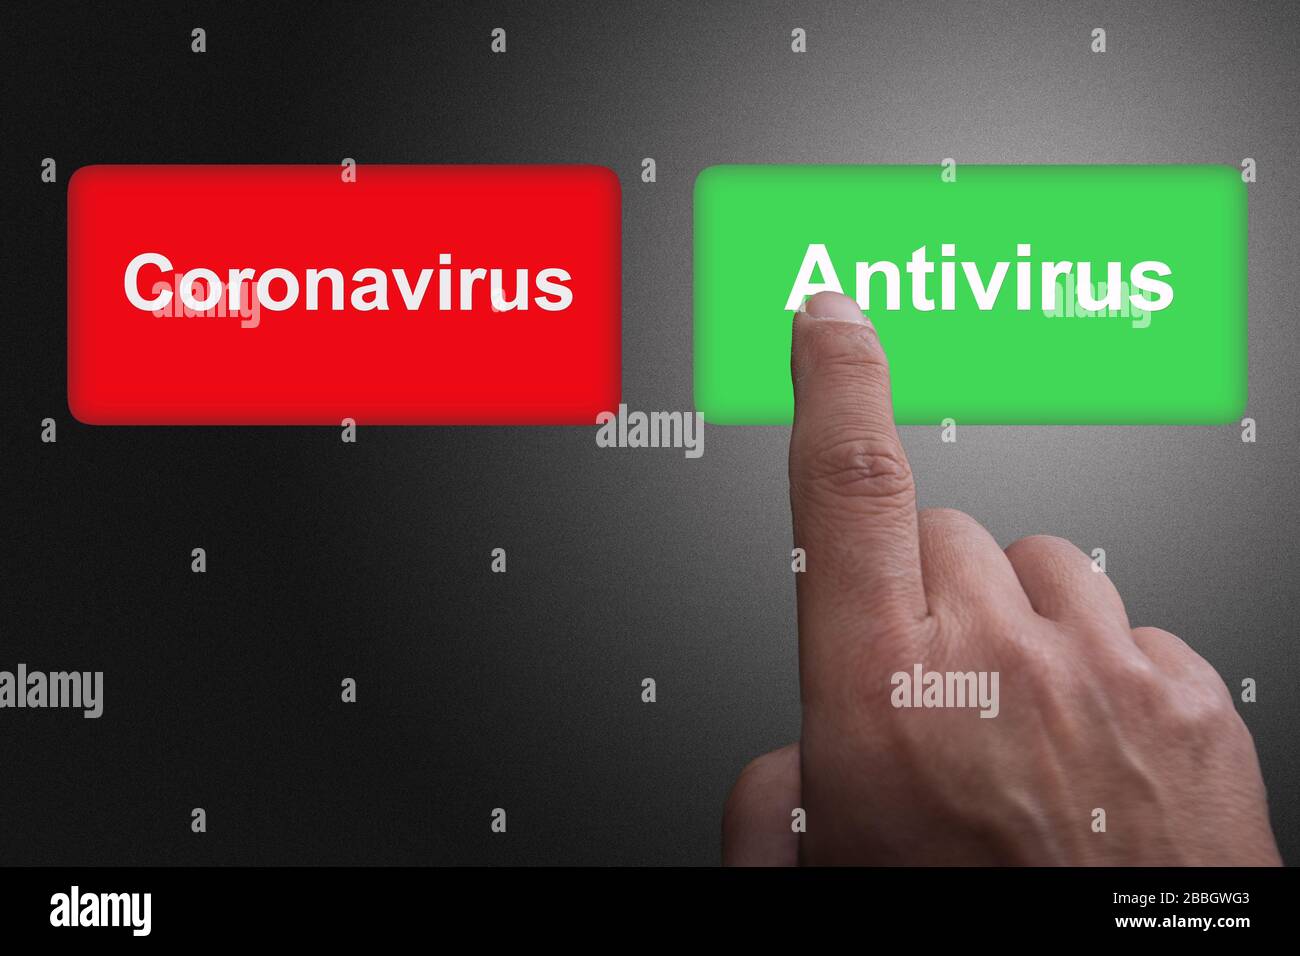 COVID-19 Virus Vaccine discovery or antibodies research success concept, Red and green buttons with Coronavirus and Antivirus text Stock Photo